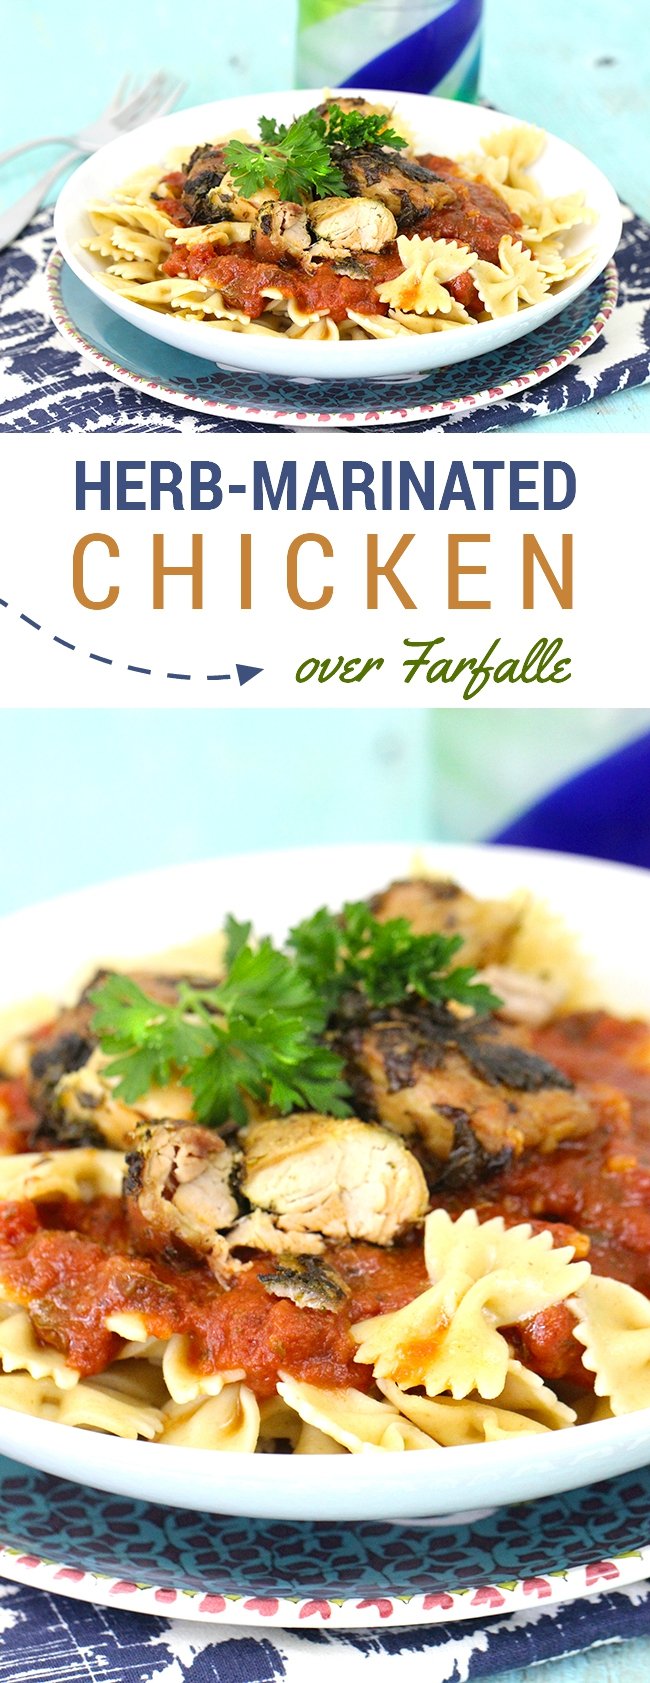 Easy Herb Marinated Chicken over Farfalle